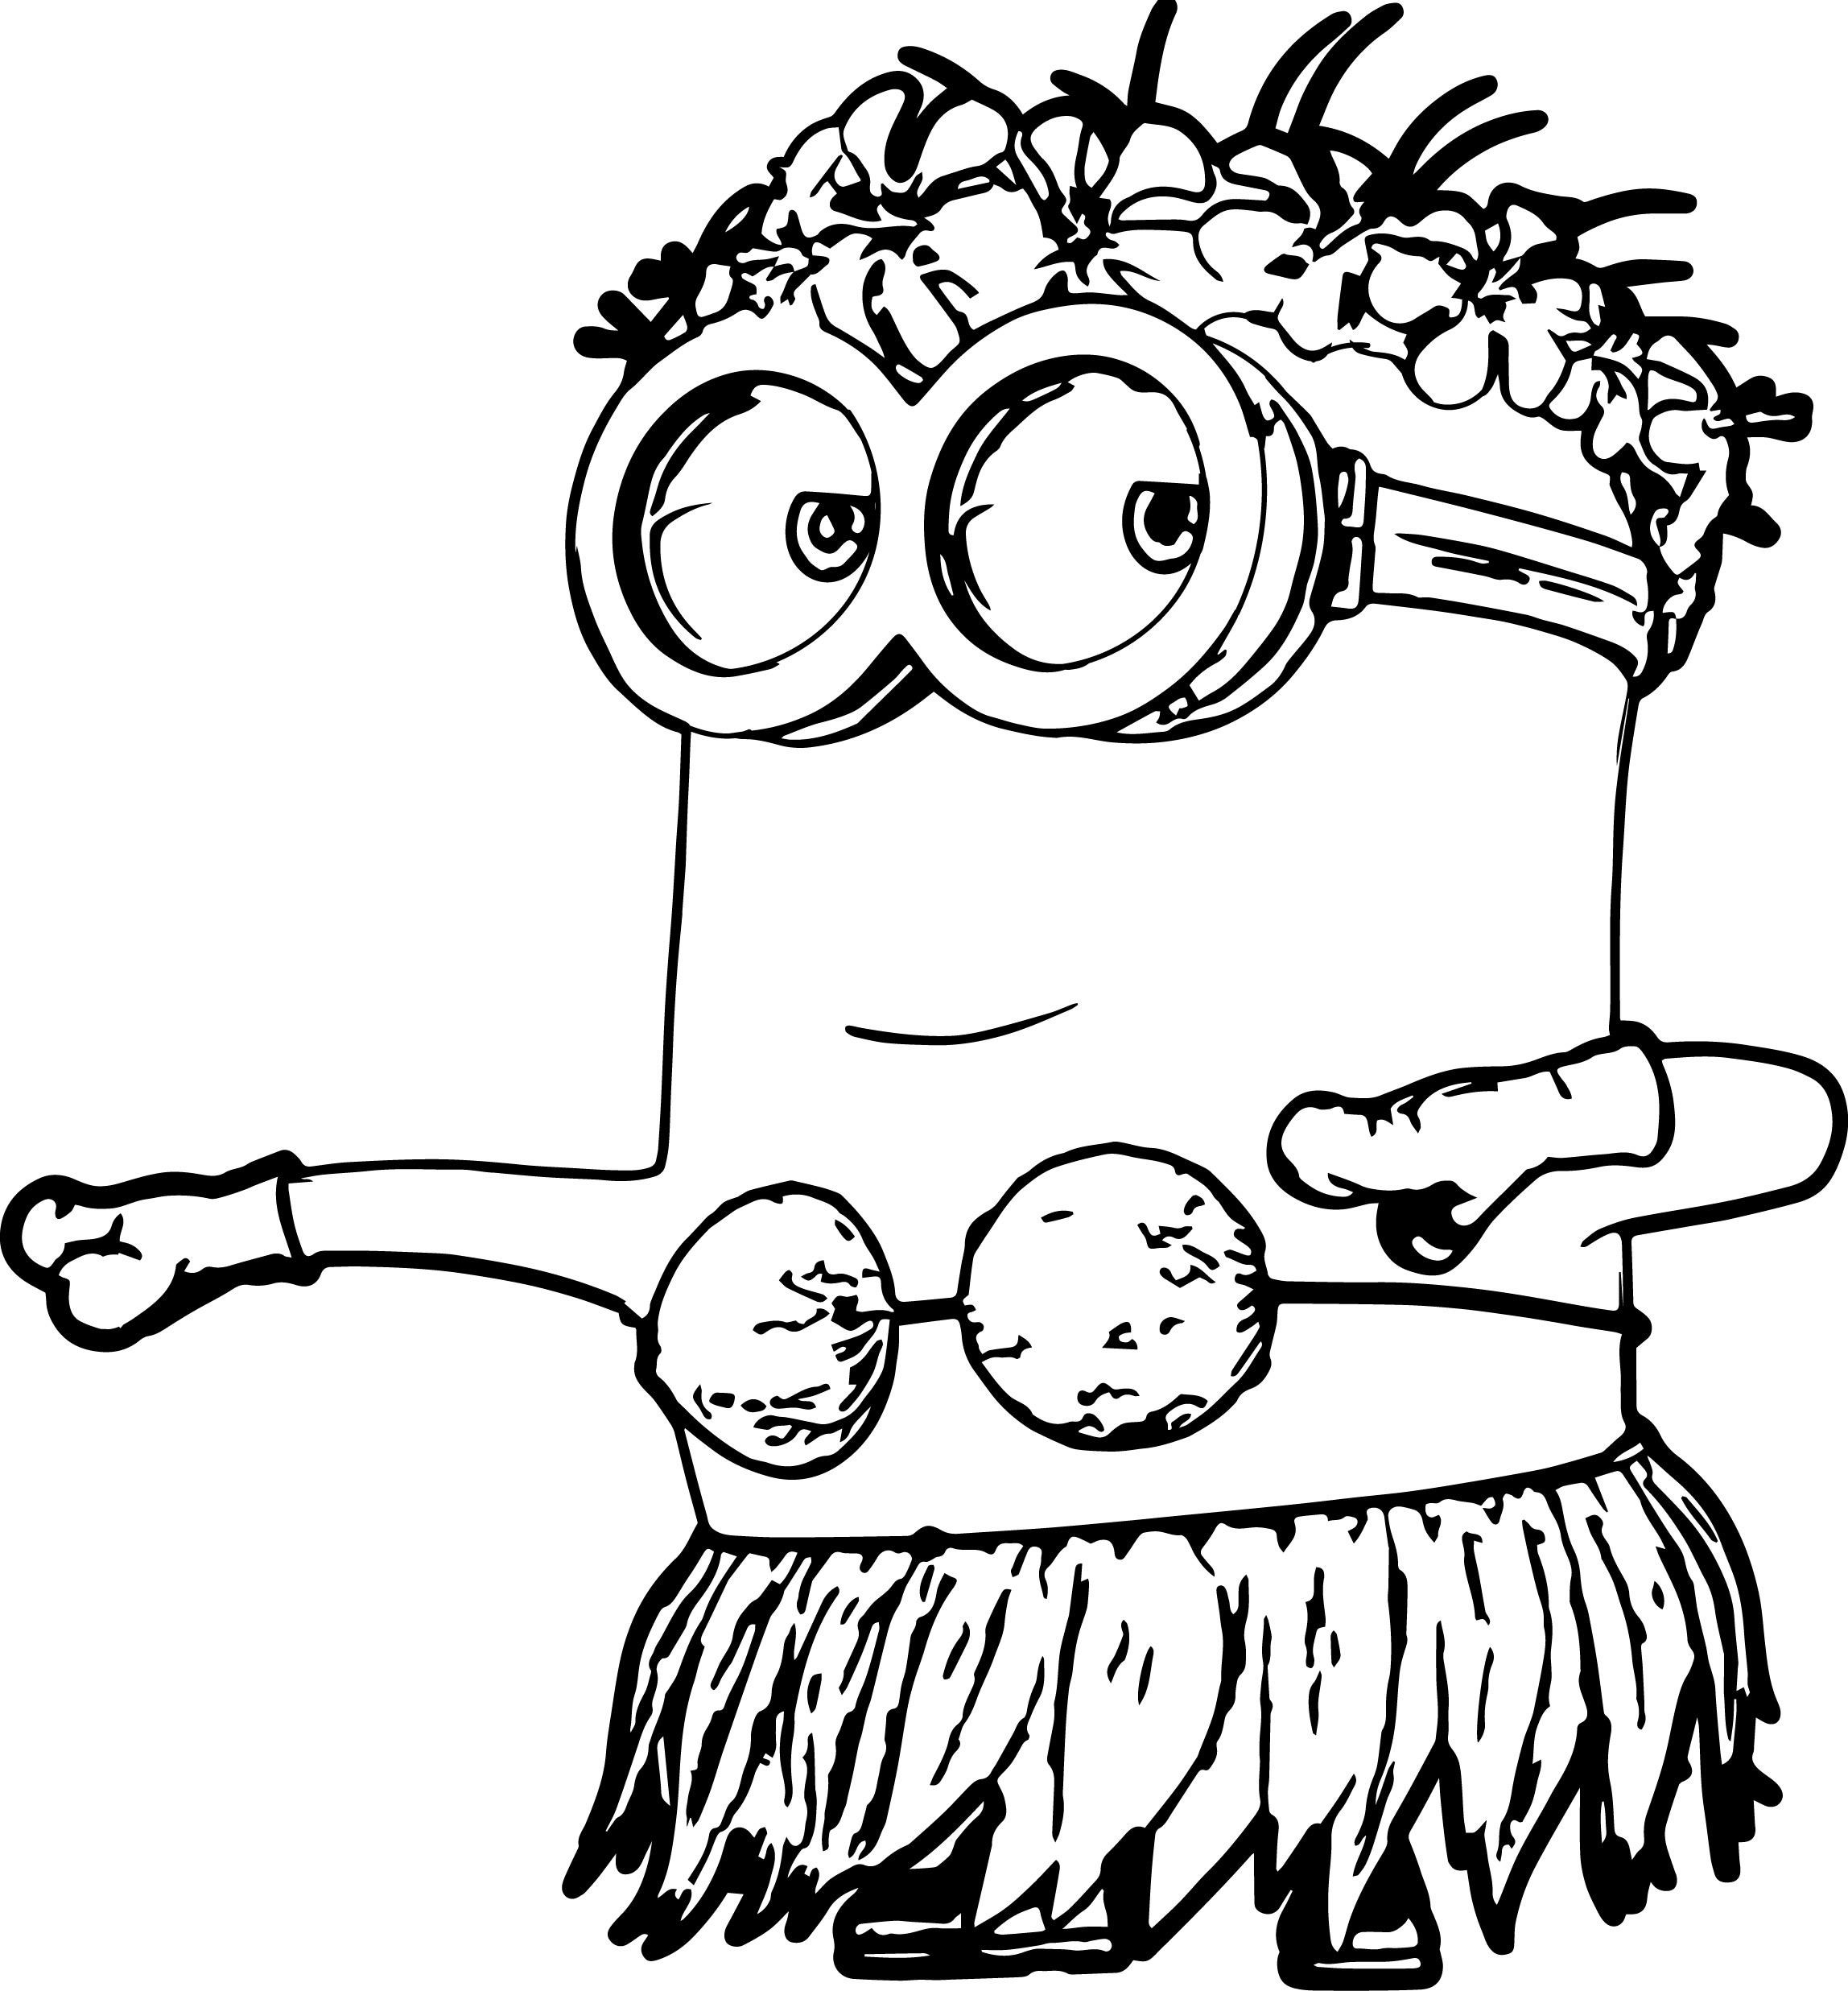 Free-Minion-Coloring-Pages-Printables